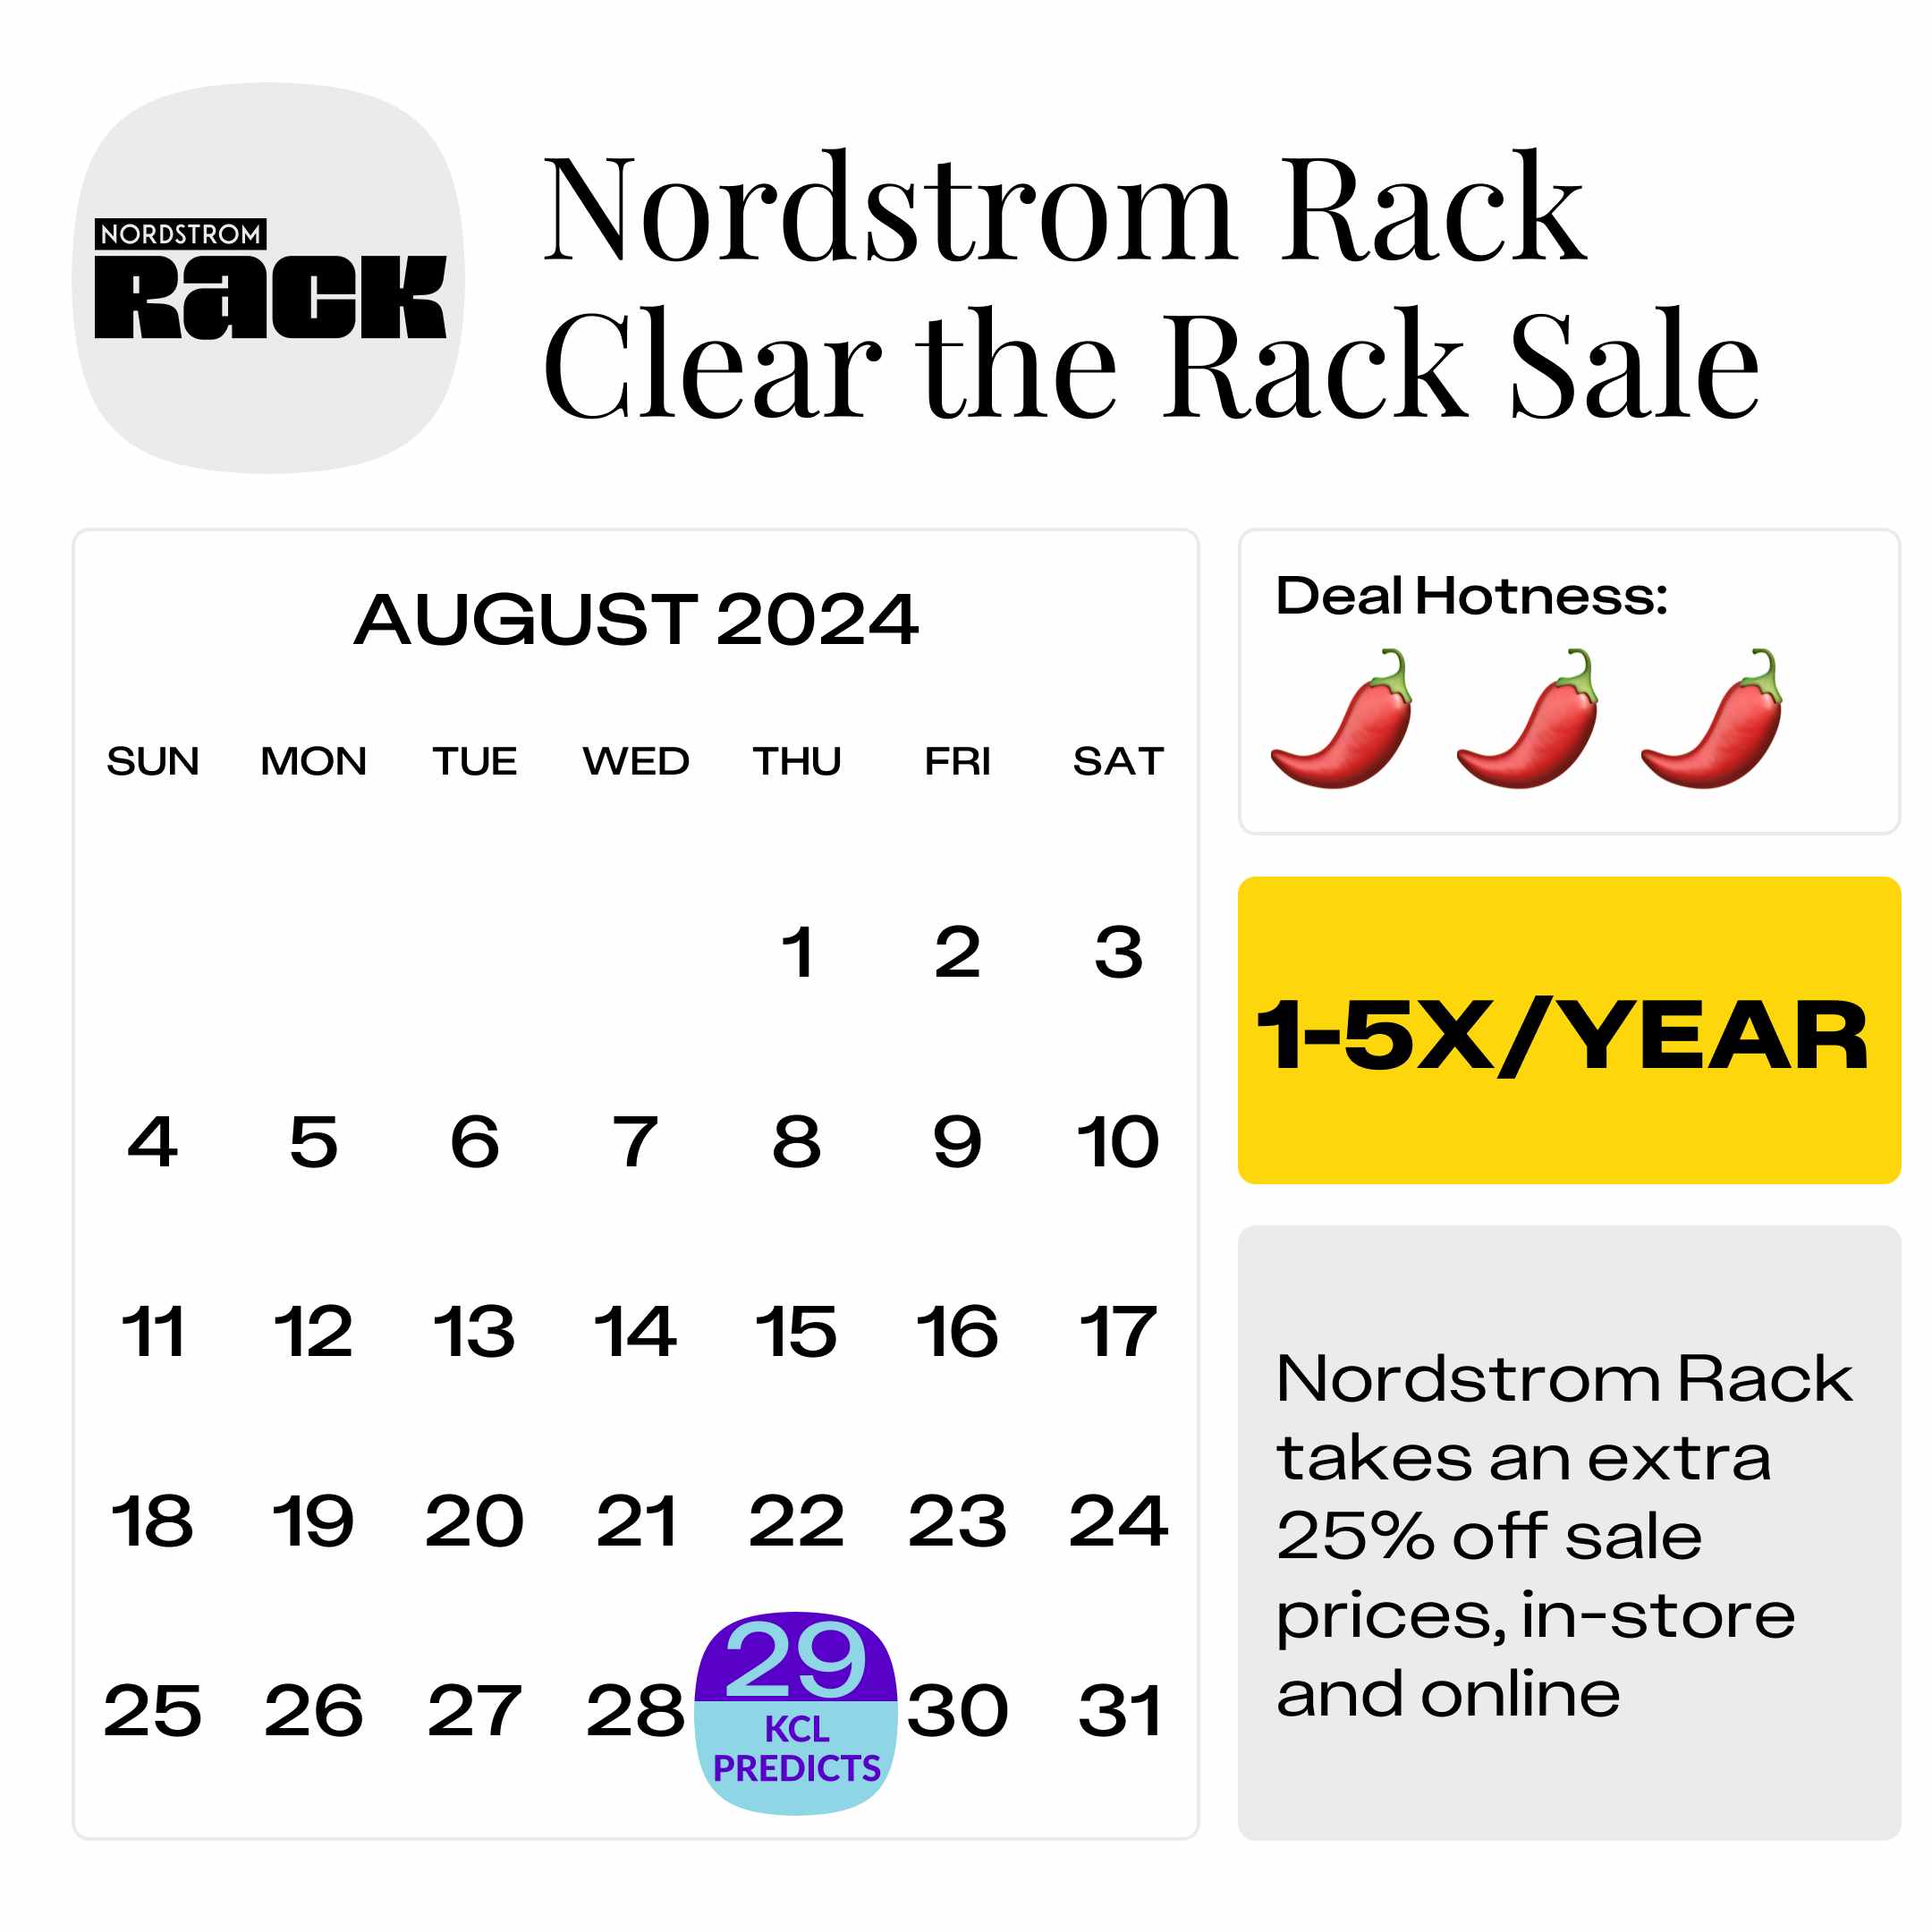 Nordstrom Rack Clear the rack august 2024 prediction